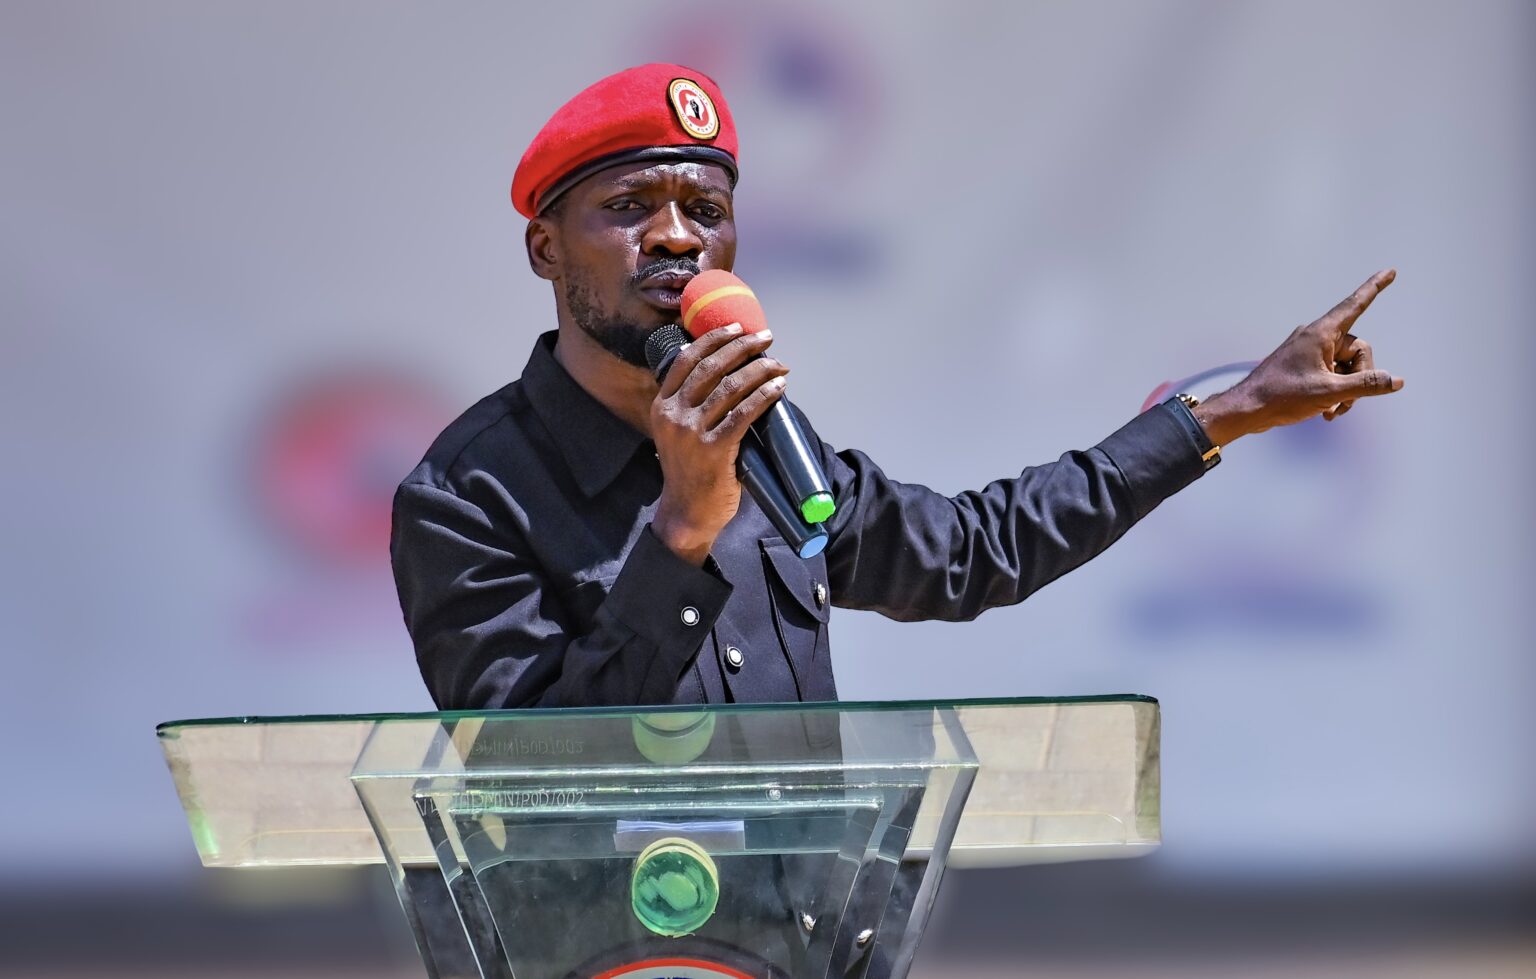 Conflict Erupts at UHRC Tribunal As Bobi Wine Accuses Wangadya of Rights Violations